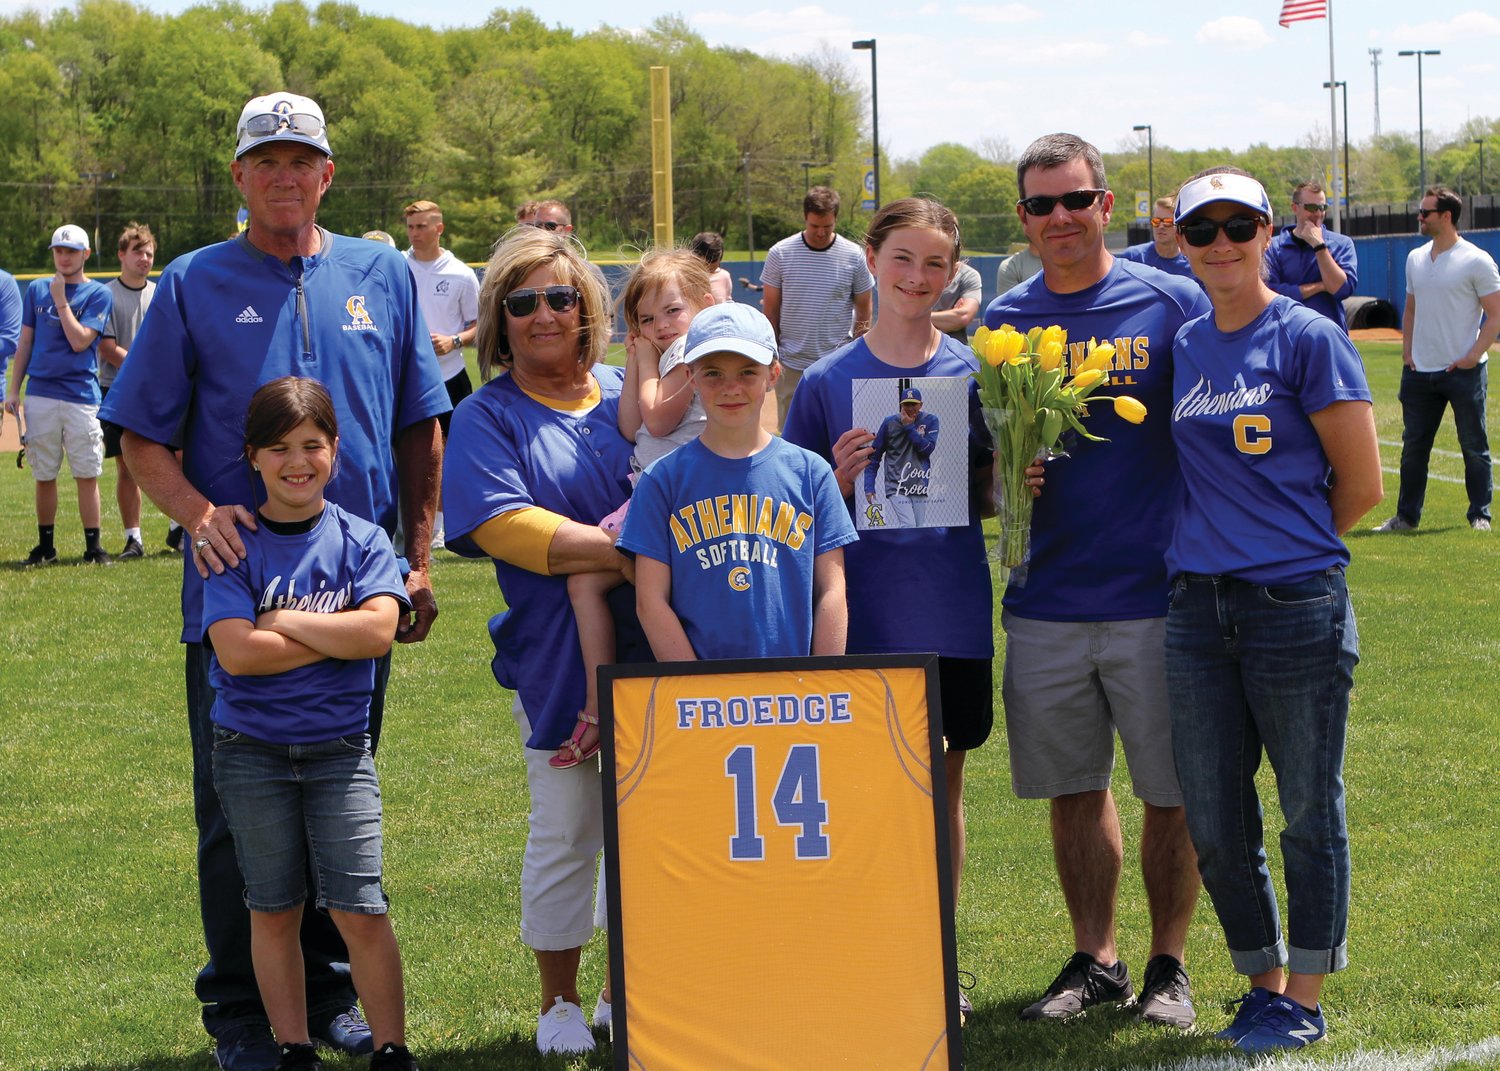 John Froedge and family celebrated his retirement during the Crawfordsville baseball alumni day last Saturday.